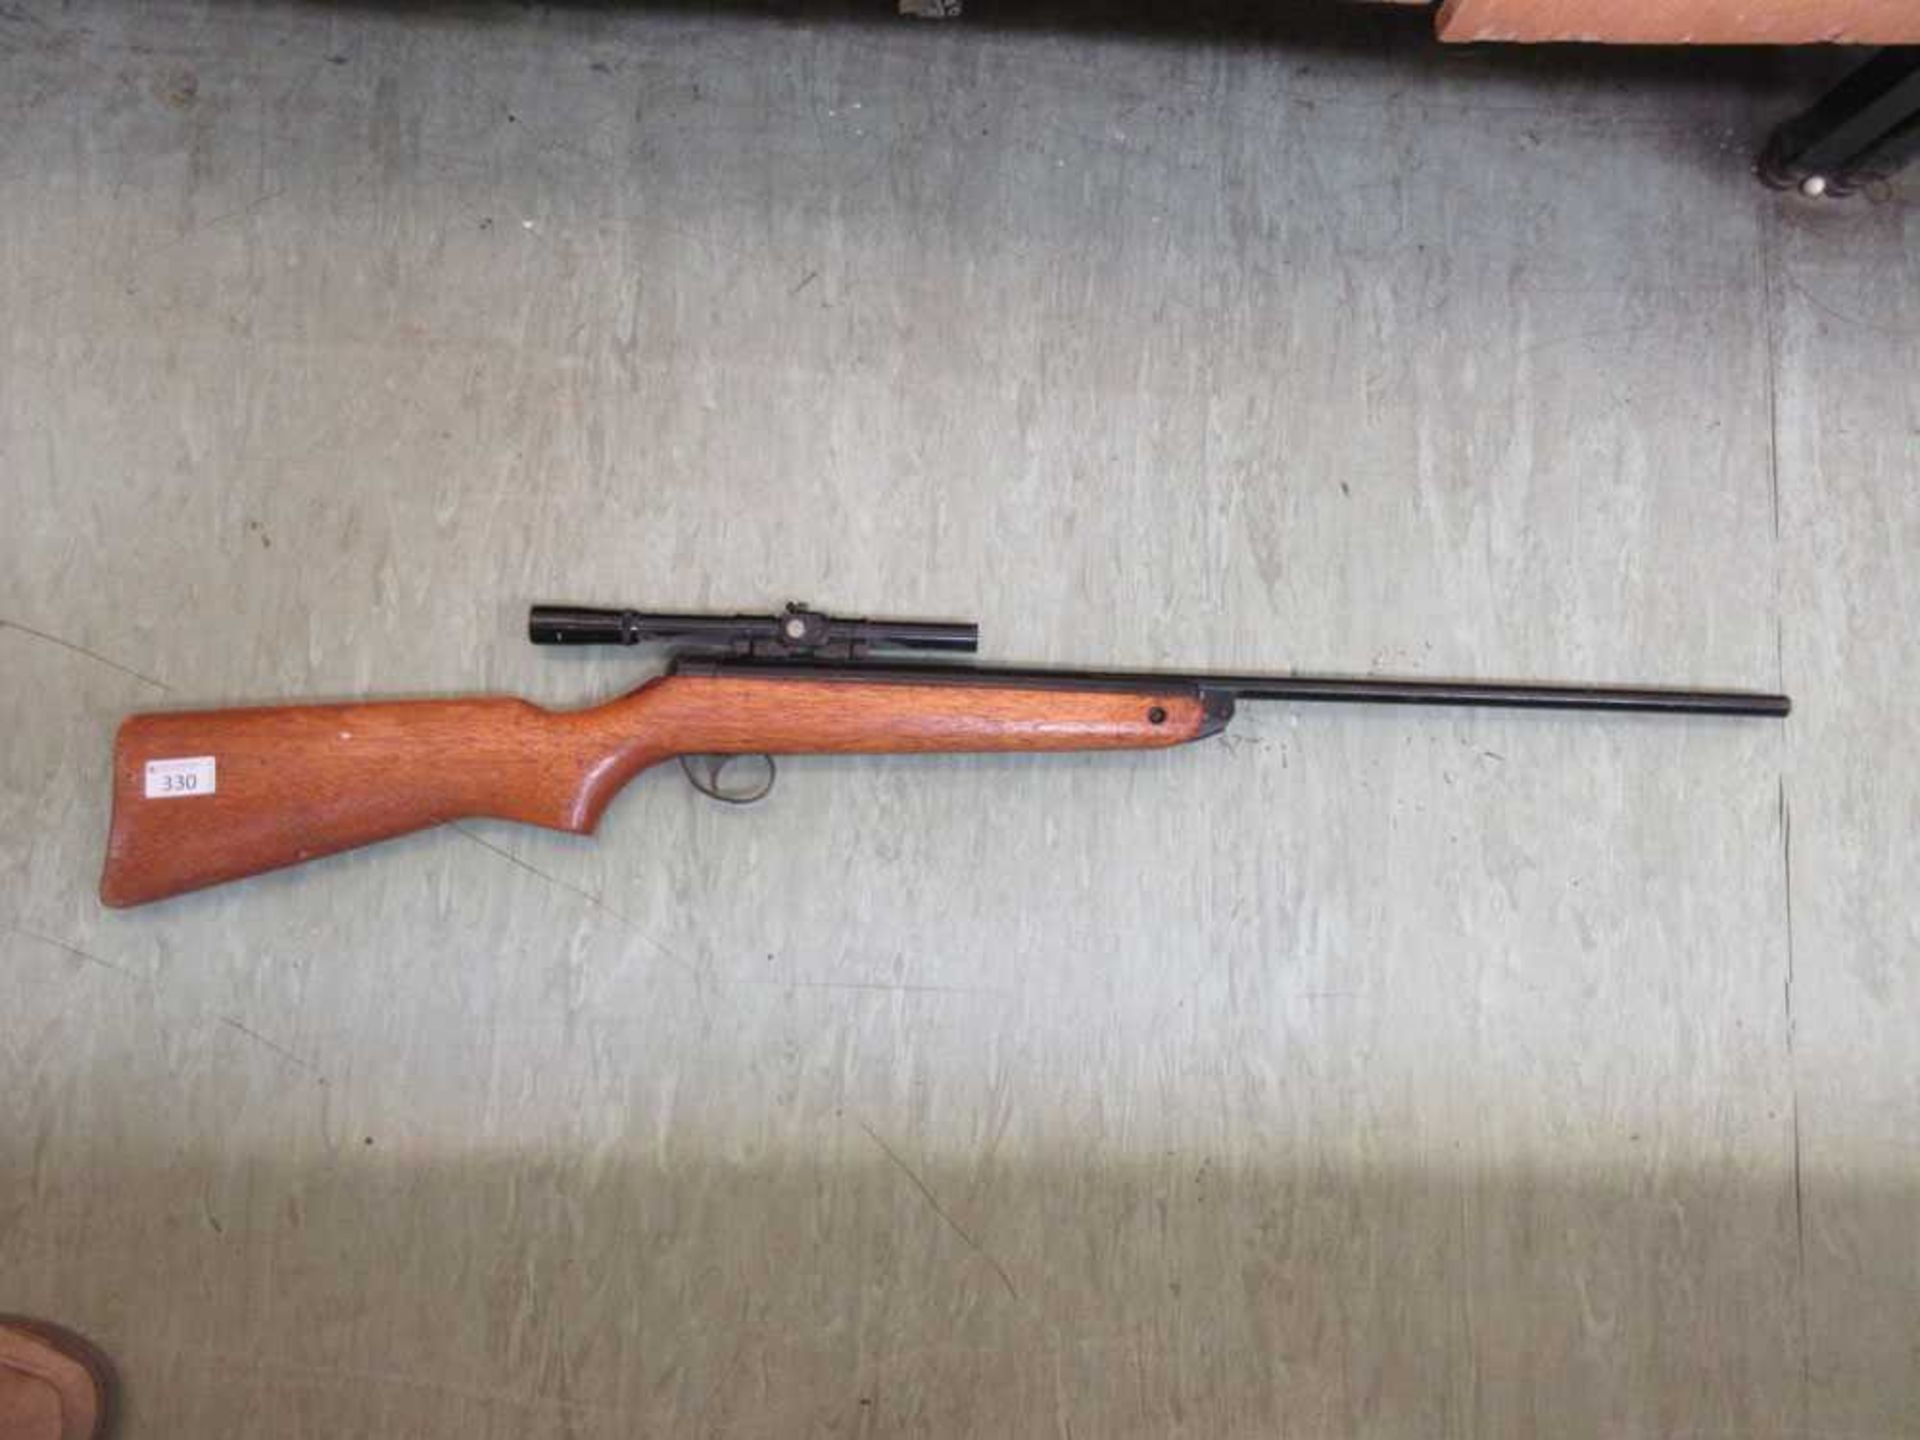 A BSA air rifle with Armex 4x15 scope attached Unsure of model. Barrel slightly rusted. Unsure of